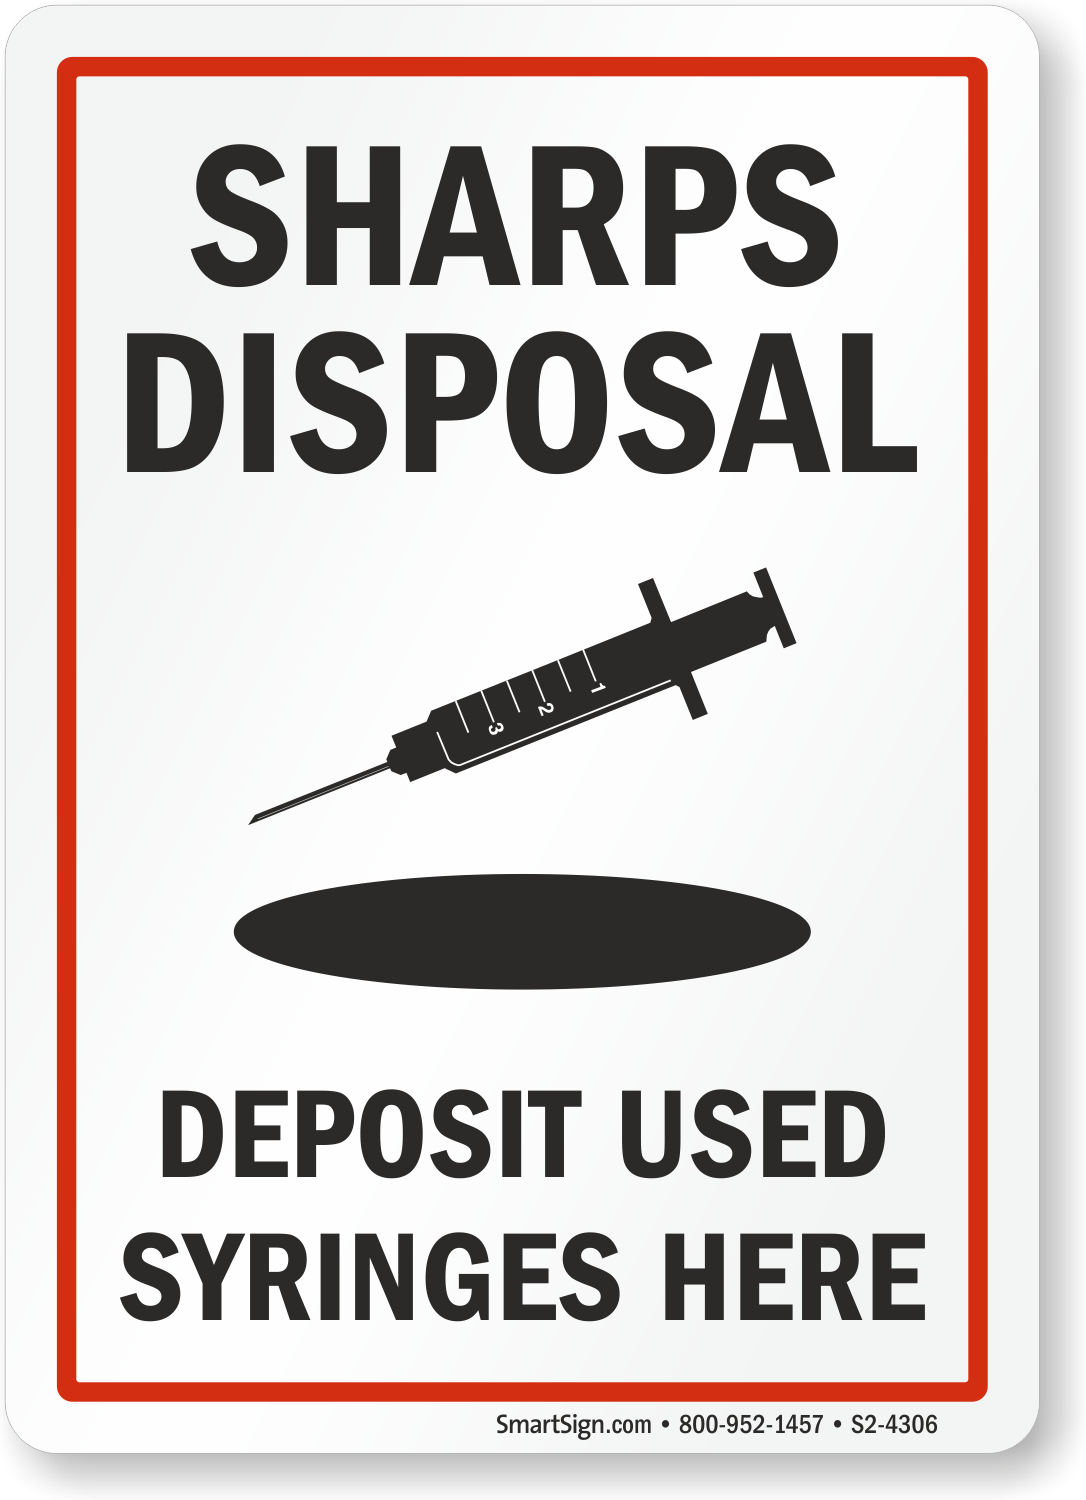 Sharps Container Printable Labels Free Sharps Disposa - vrogue.co